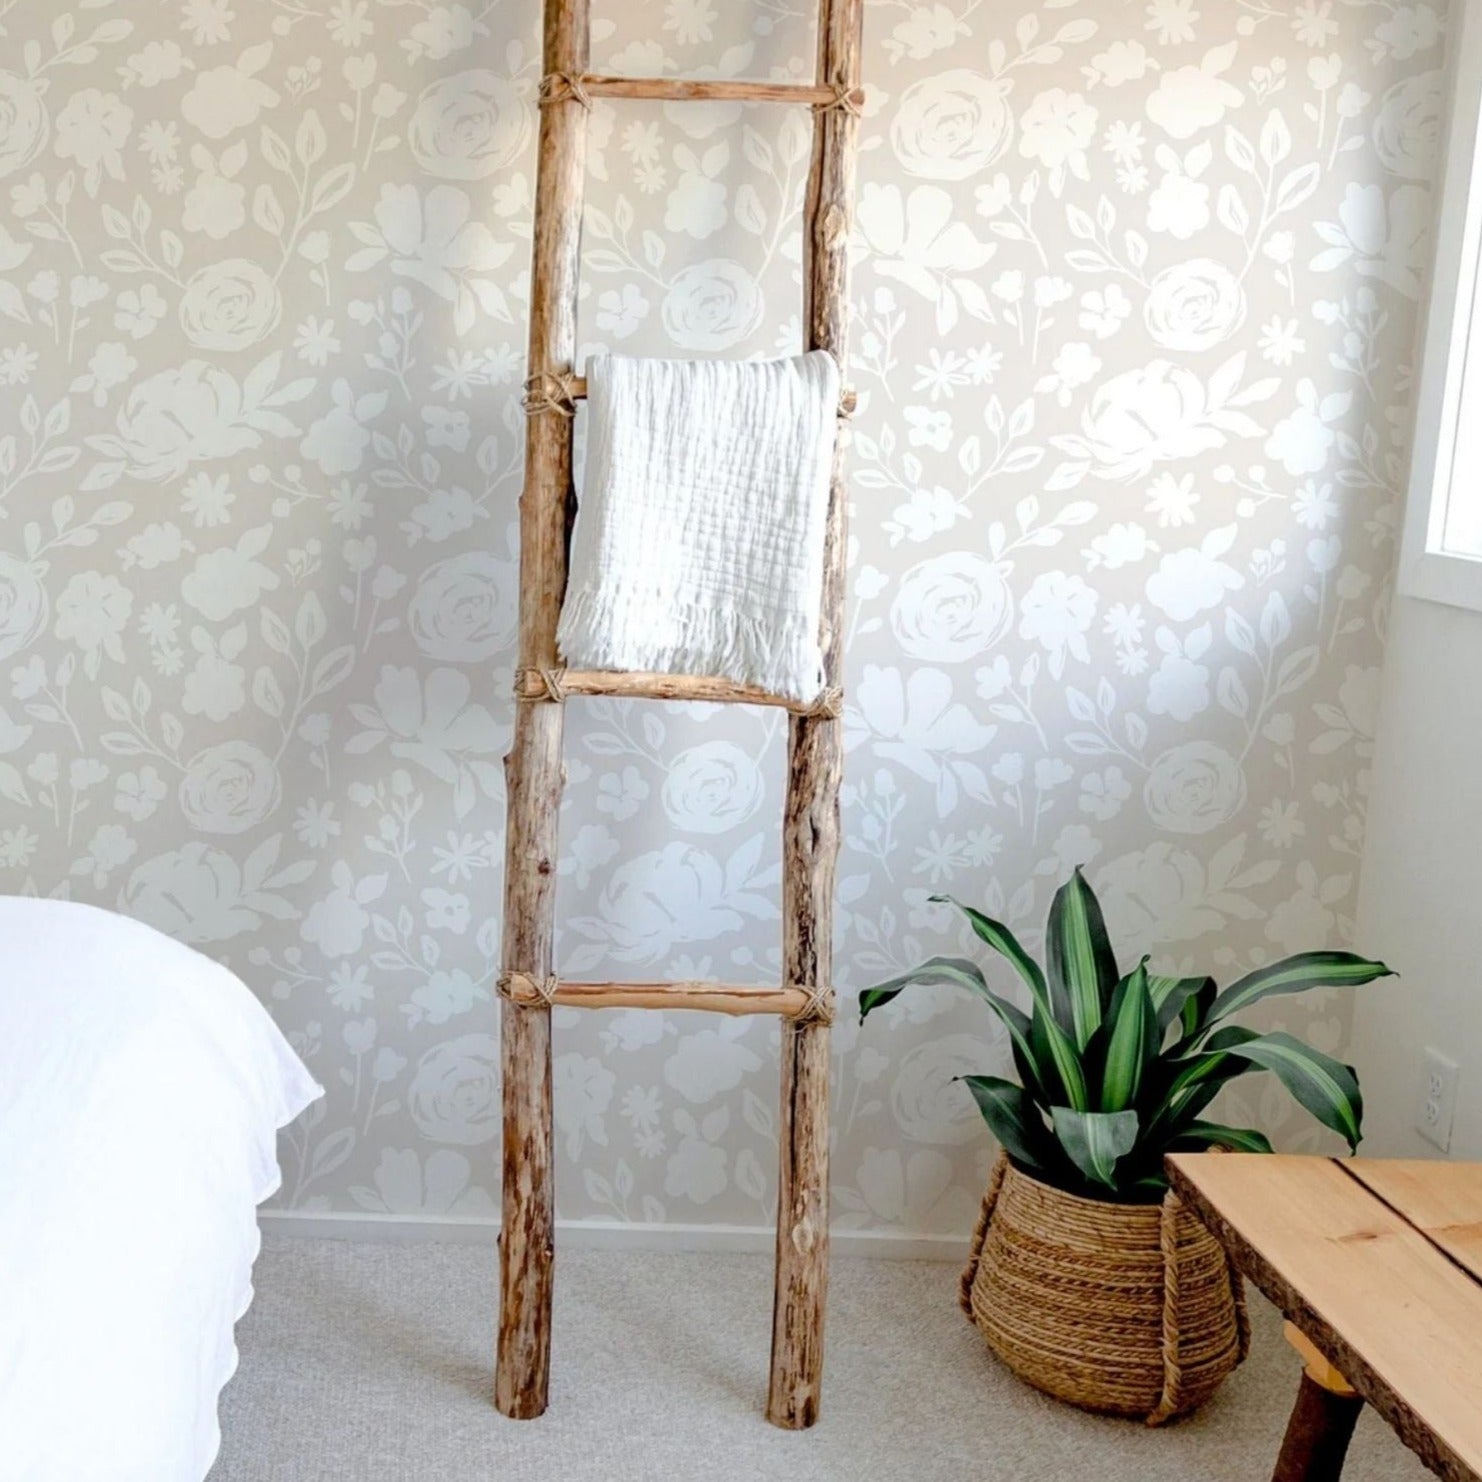 A bedroom setting showcases the Silhouette Floral Wallpaper, creating a tranquil ambiance with its faded linen floral silhouettes. A rustic wooden ladder serves as a unique decorative piece, draped with a white towel, next to a potted plant, enhancing the room’s natural and calm aesthetic.